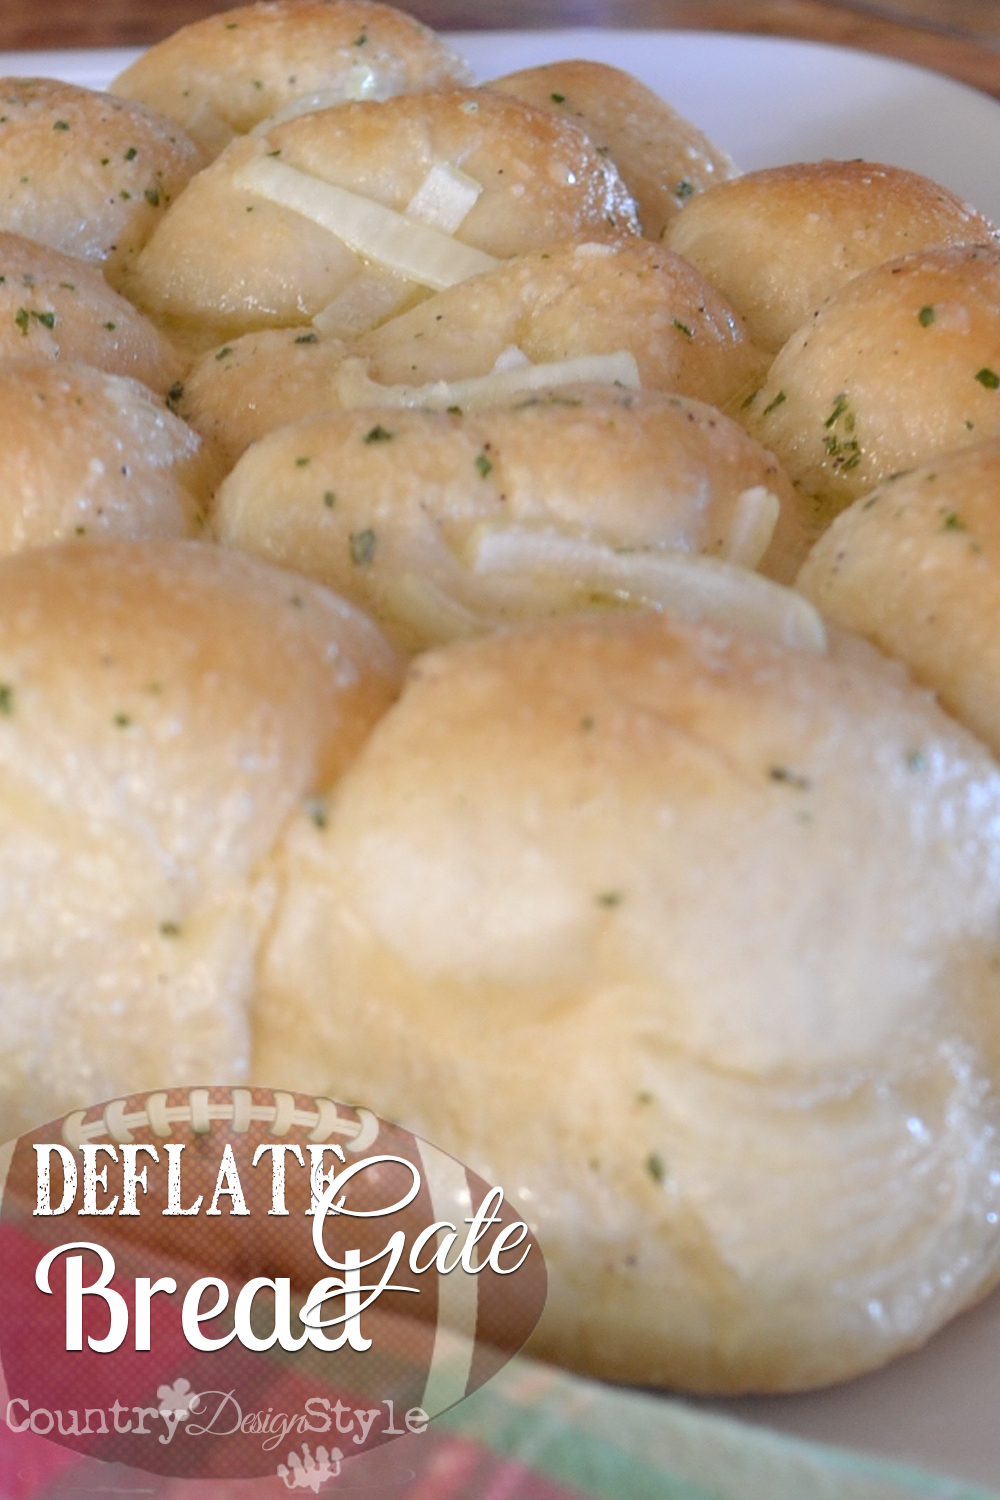 Want some yummy bread to go with your super bowl feast? This is buttery and easy! https://countrydesignstyle.com